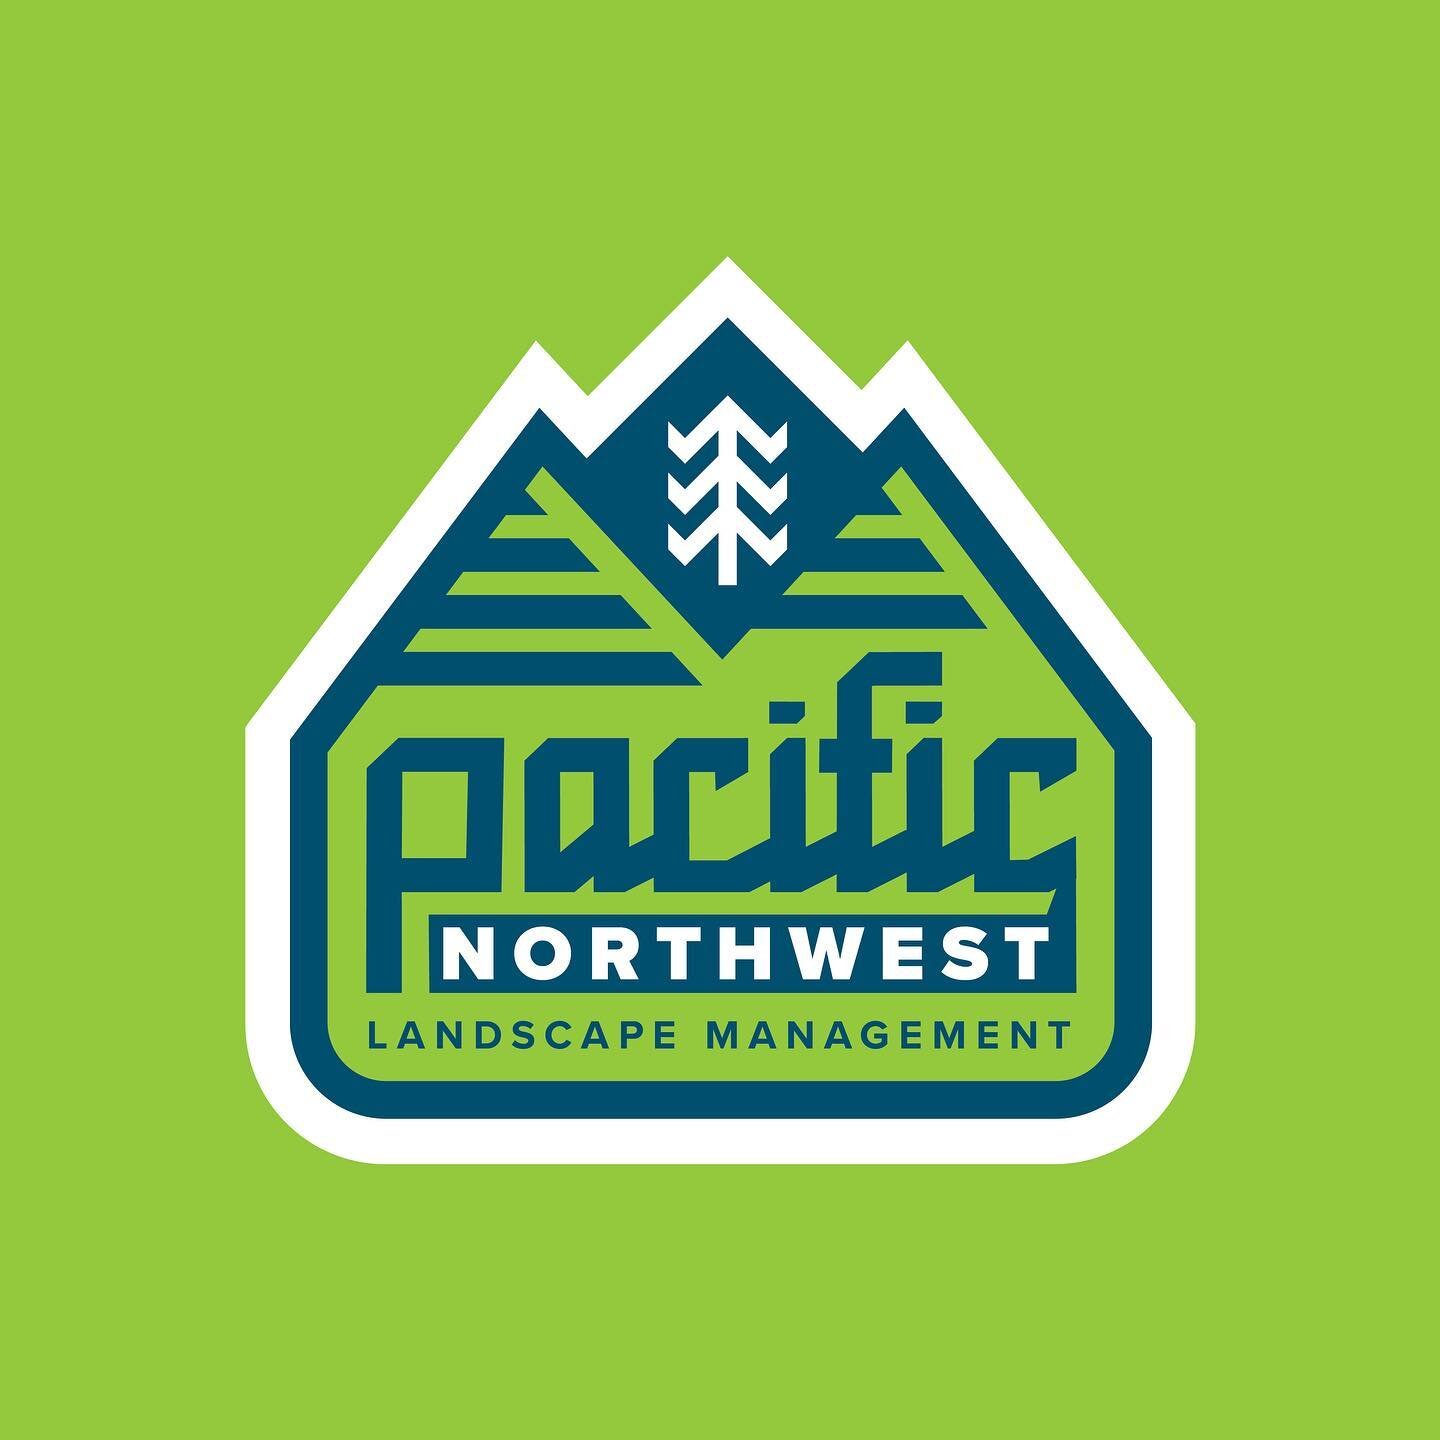 Logo Concepts for Pacific Northwest Landscape Management... Dang that&rsquo;s a mouthful! 🌲
&mdash;&mdash;
olympicdesign.co
&mdash;&mdash;
&bull;
&bull;
&bull;
#bremerton #kitsapdesigners #northwestcreatives #typetuesdays #branddesigner #thicklines 